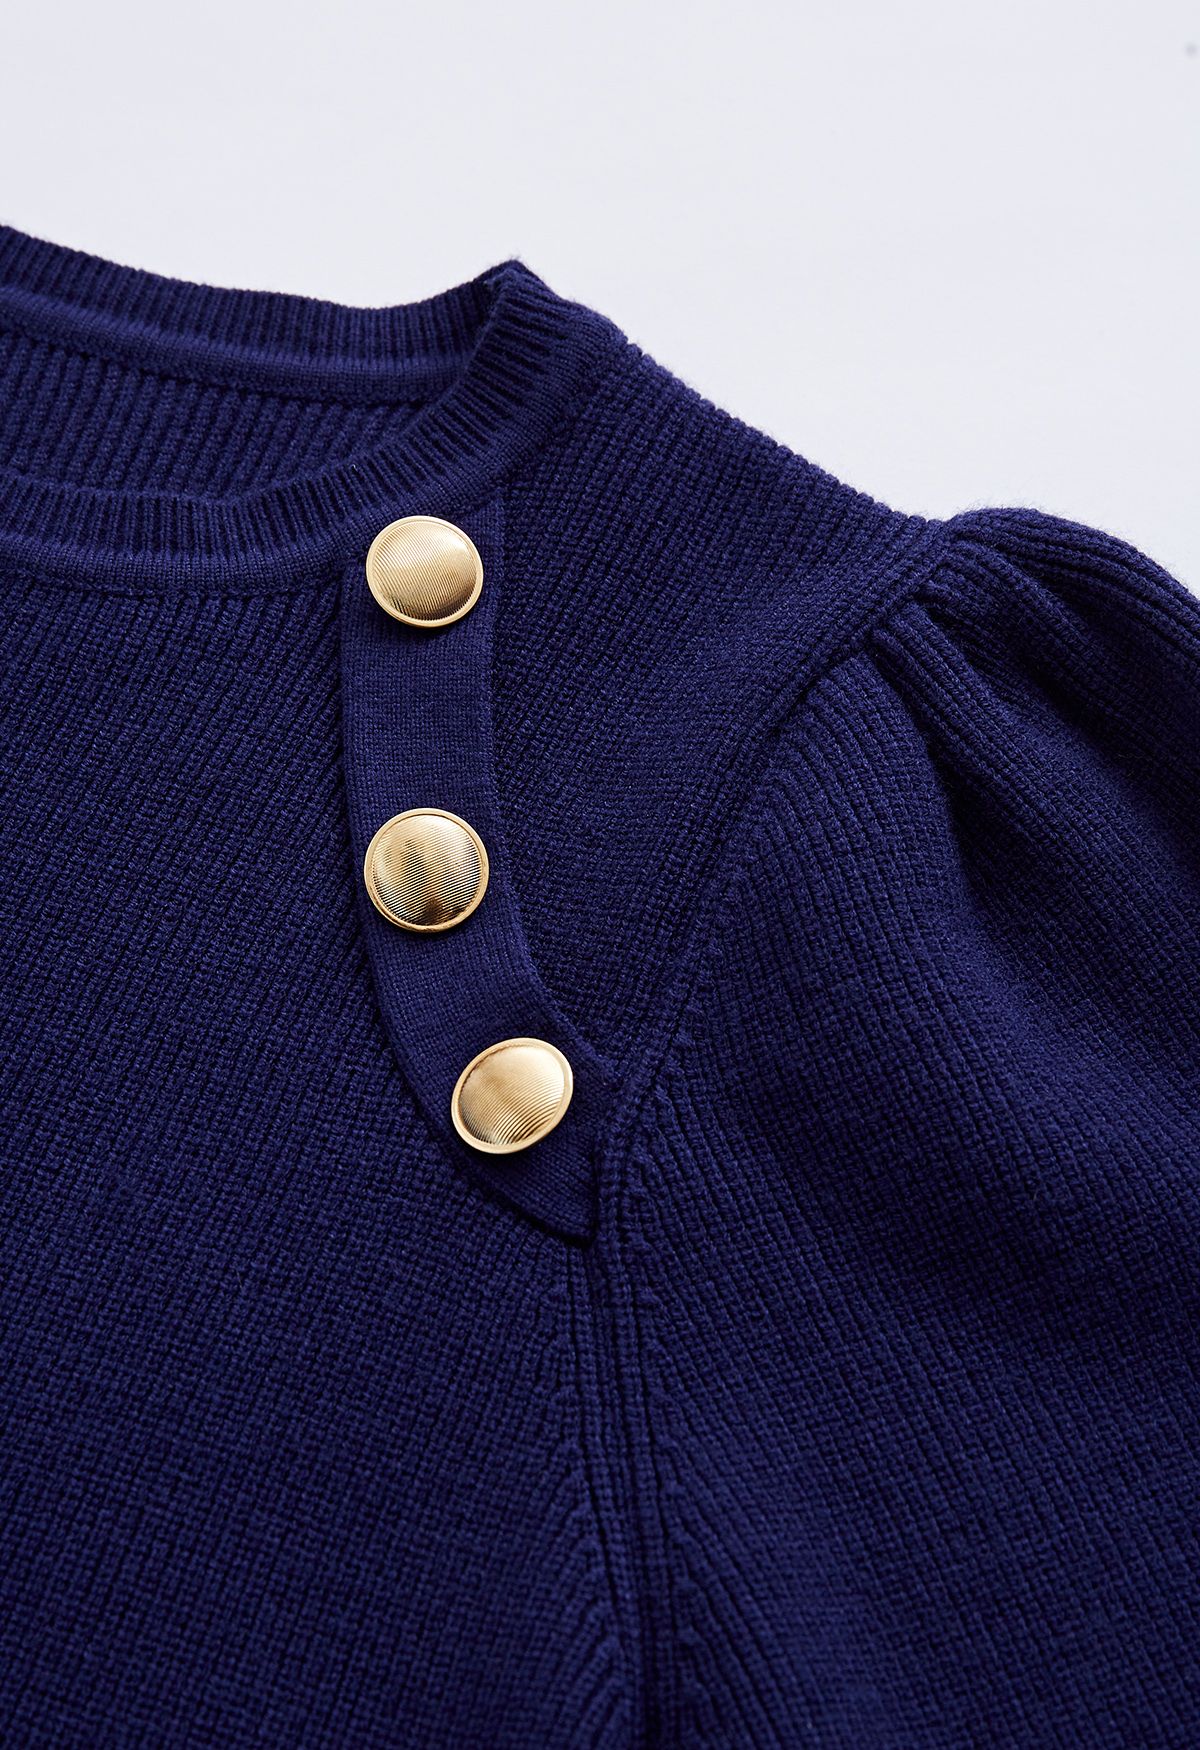 Bubble Sleeves Button Trimmed Knit Top in Navy